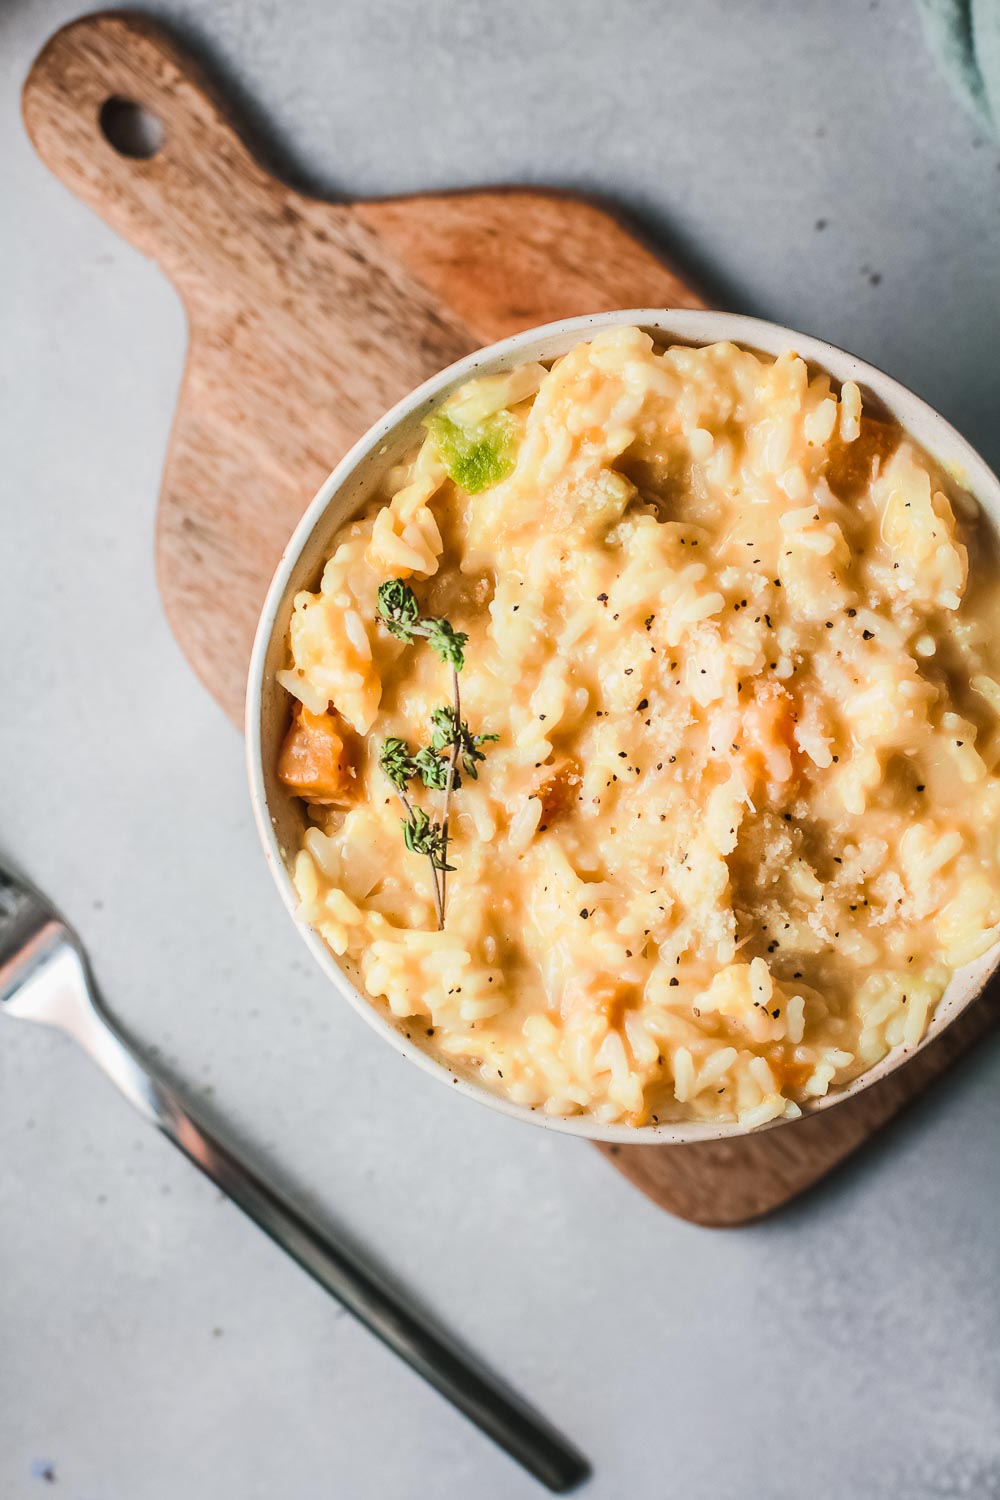 This Instant Pot Pumpkin Risotto is comforting and rich in flavor. It's perfectly delicious and can be served as a main dish or side dish with a side of crispy chicken.